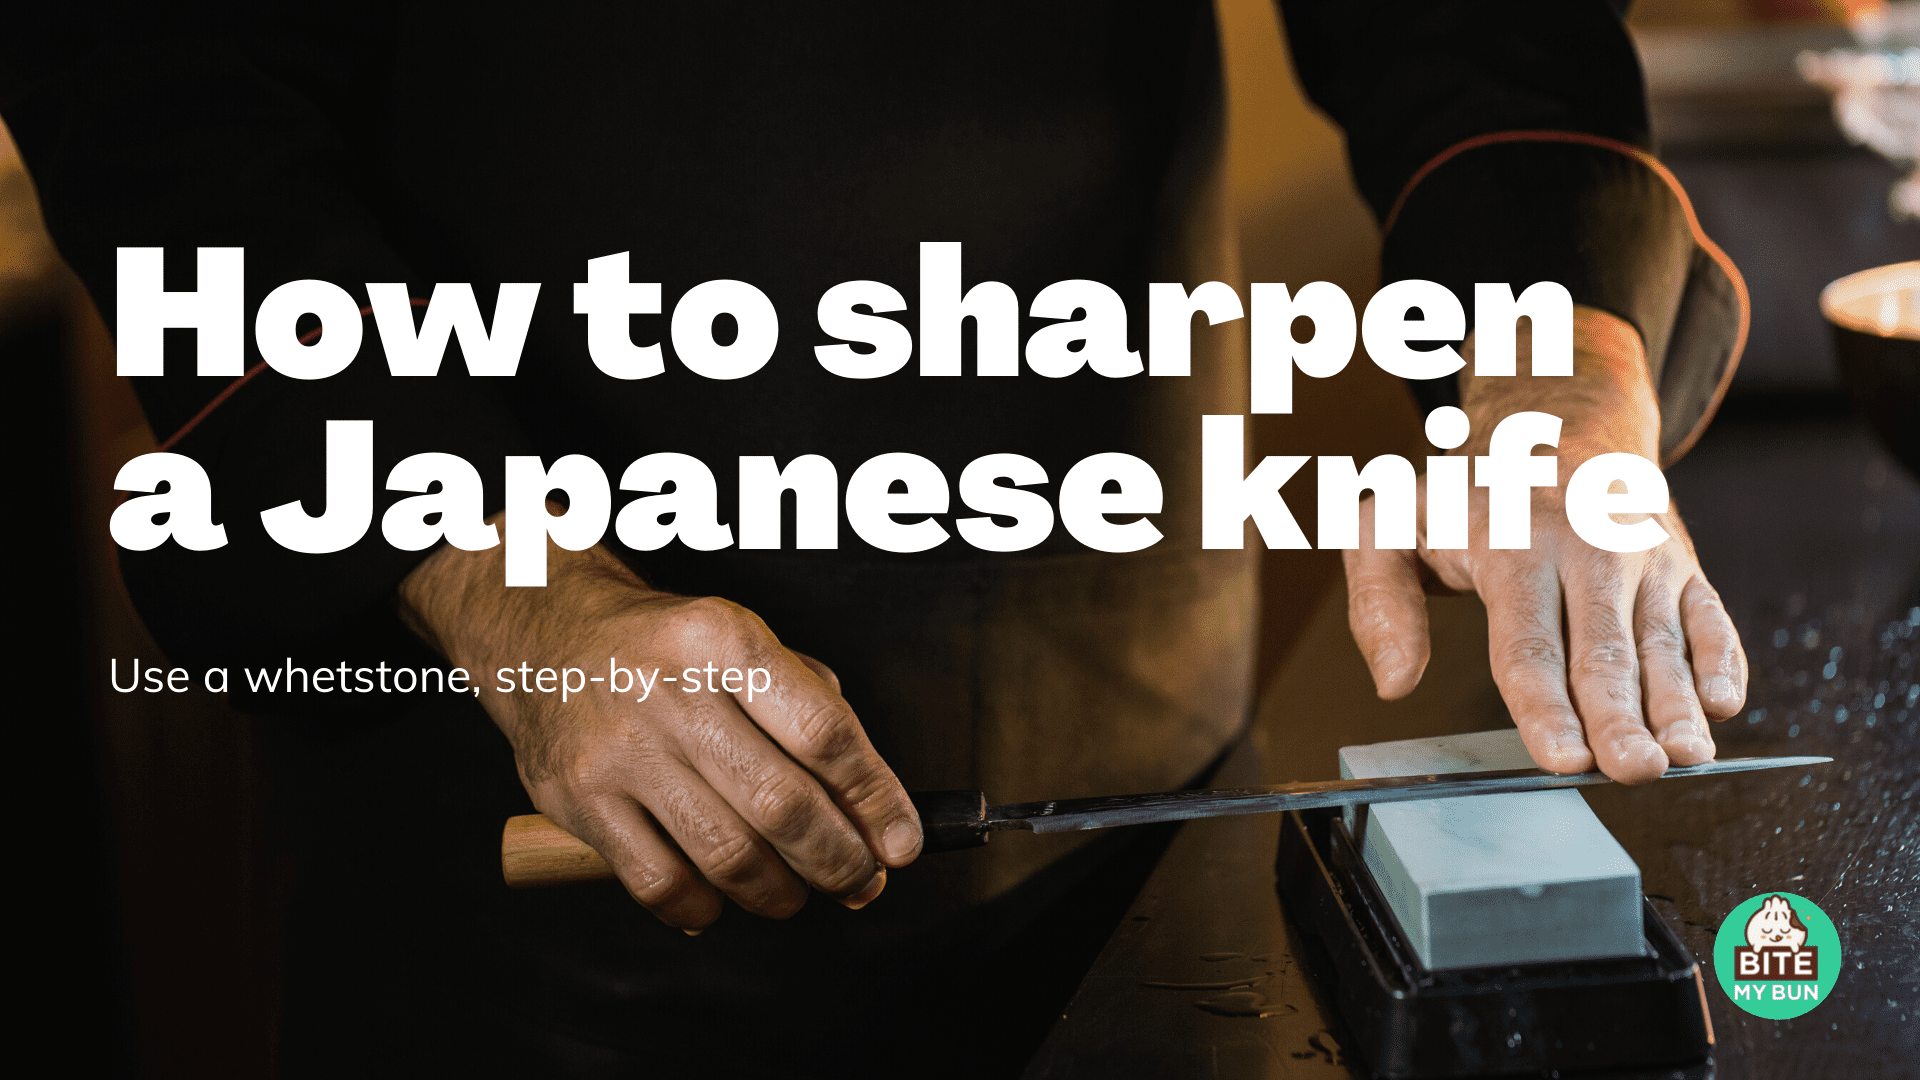 How to sharpen a Japanese knife | Use a whetstone, step-by-step